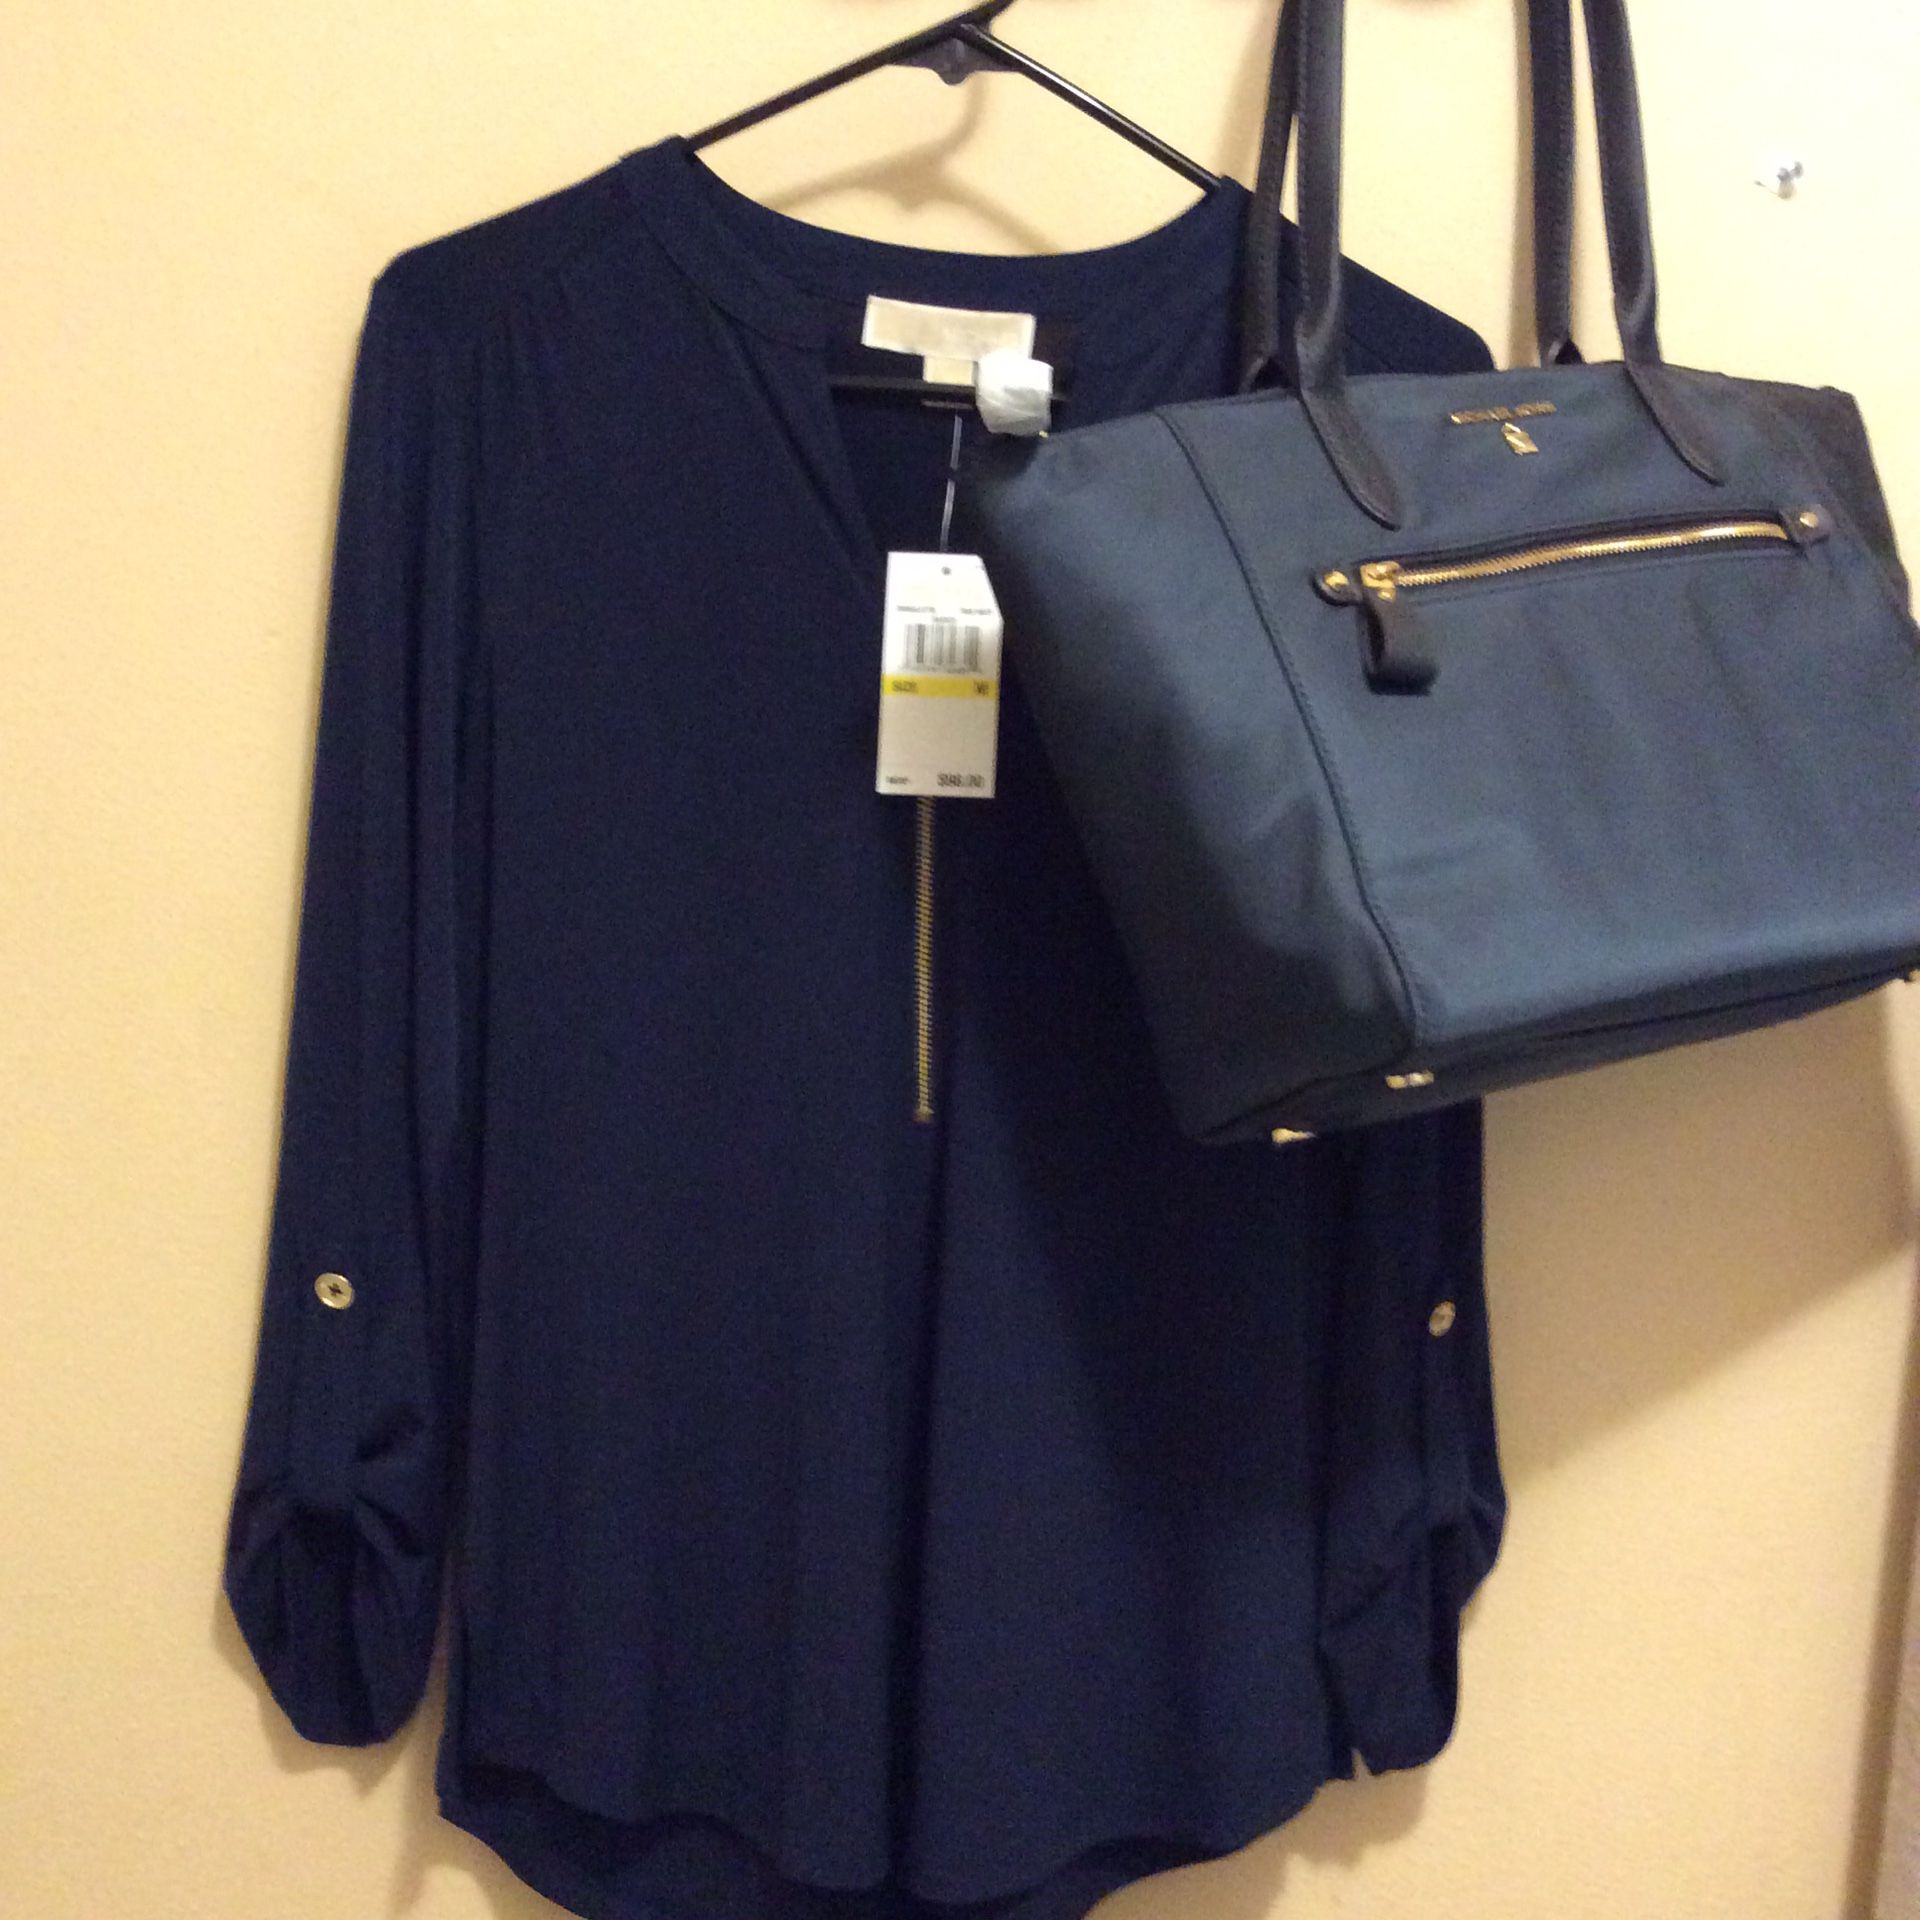 I sale together purse and blouse Michael kors